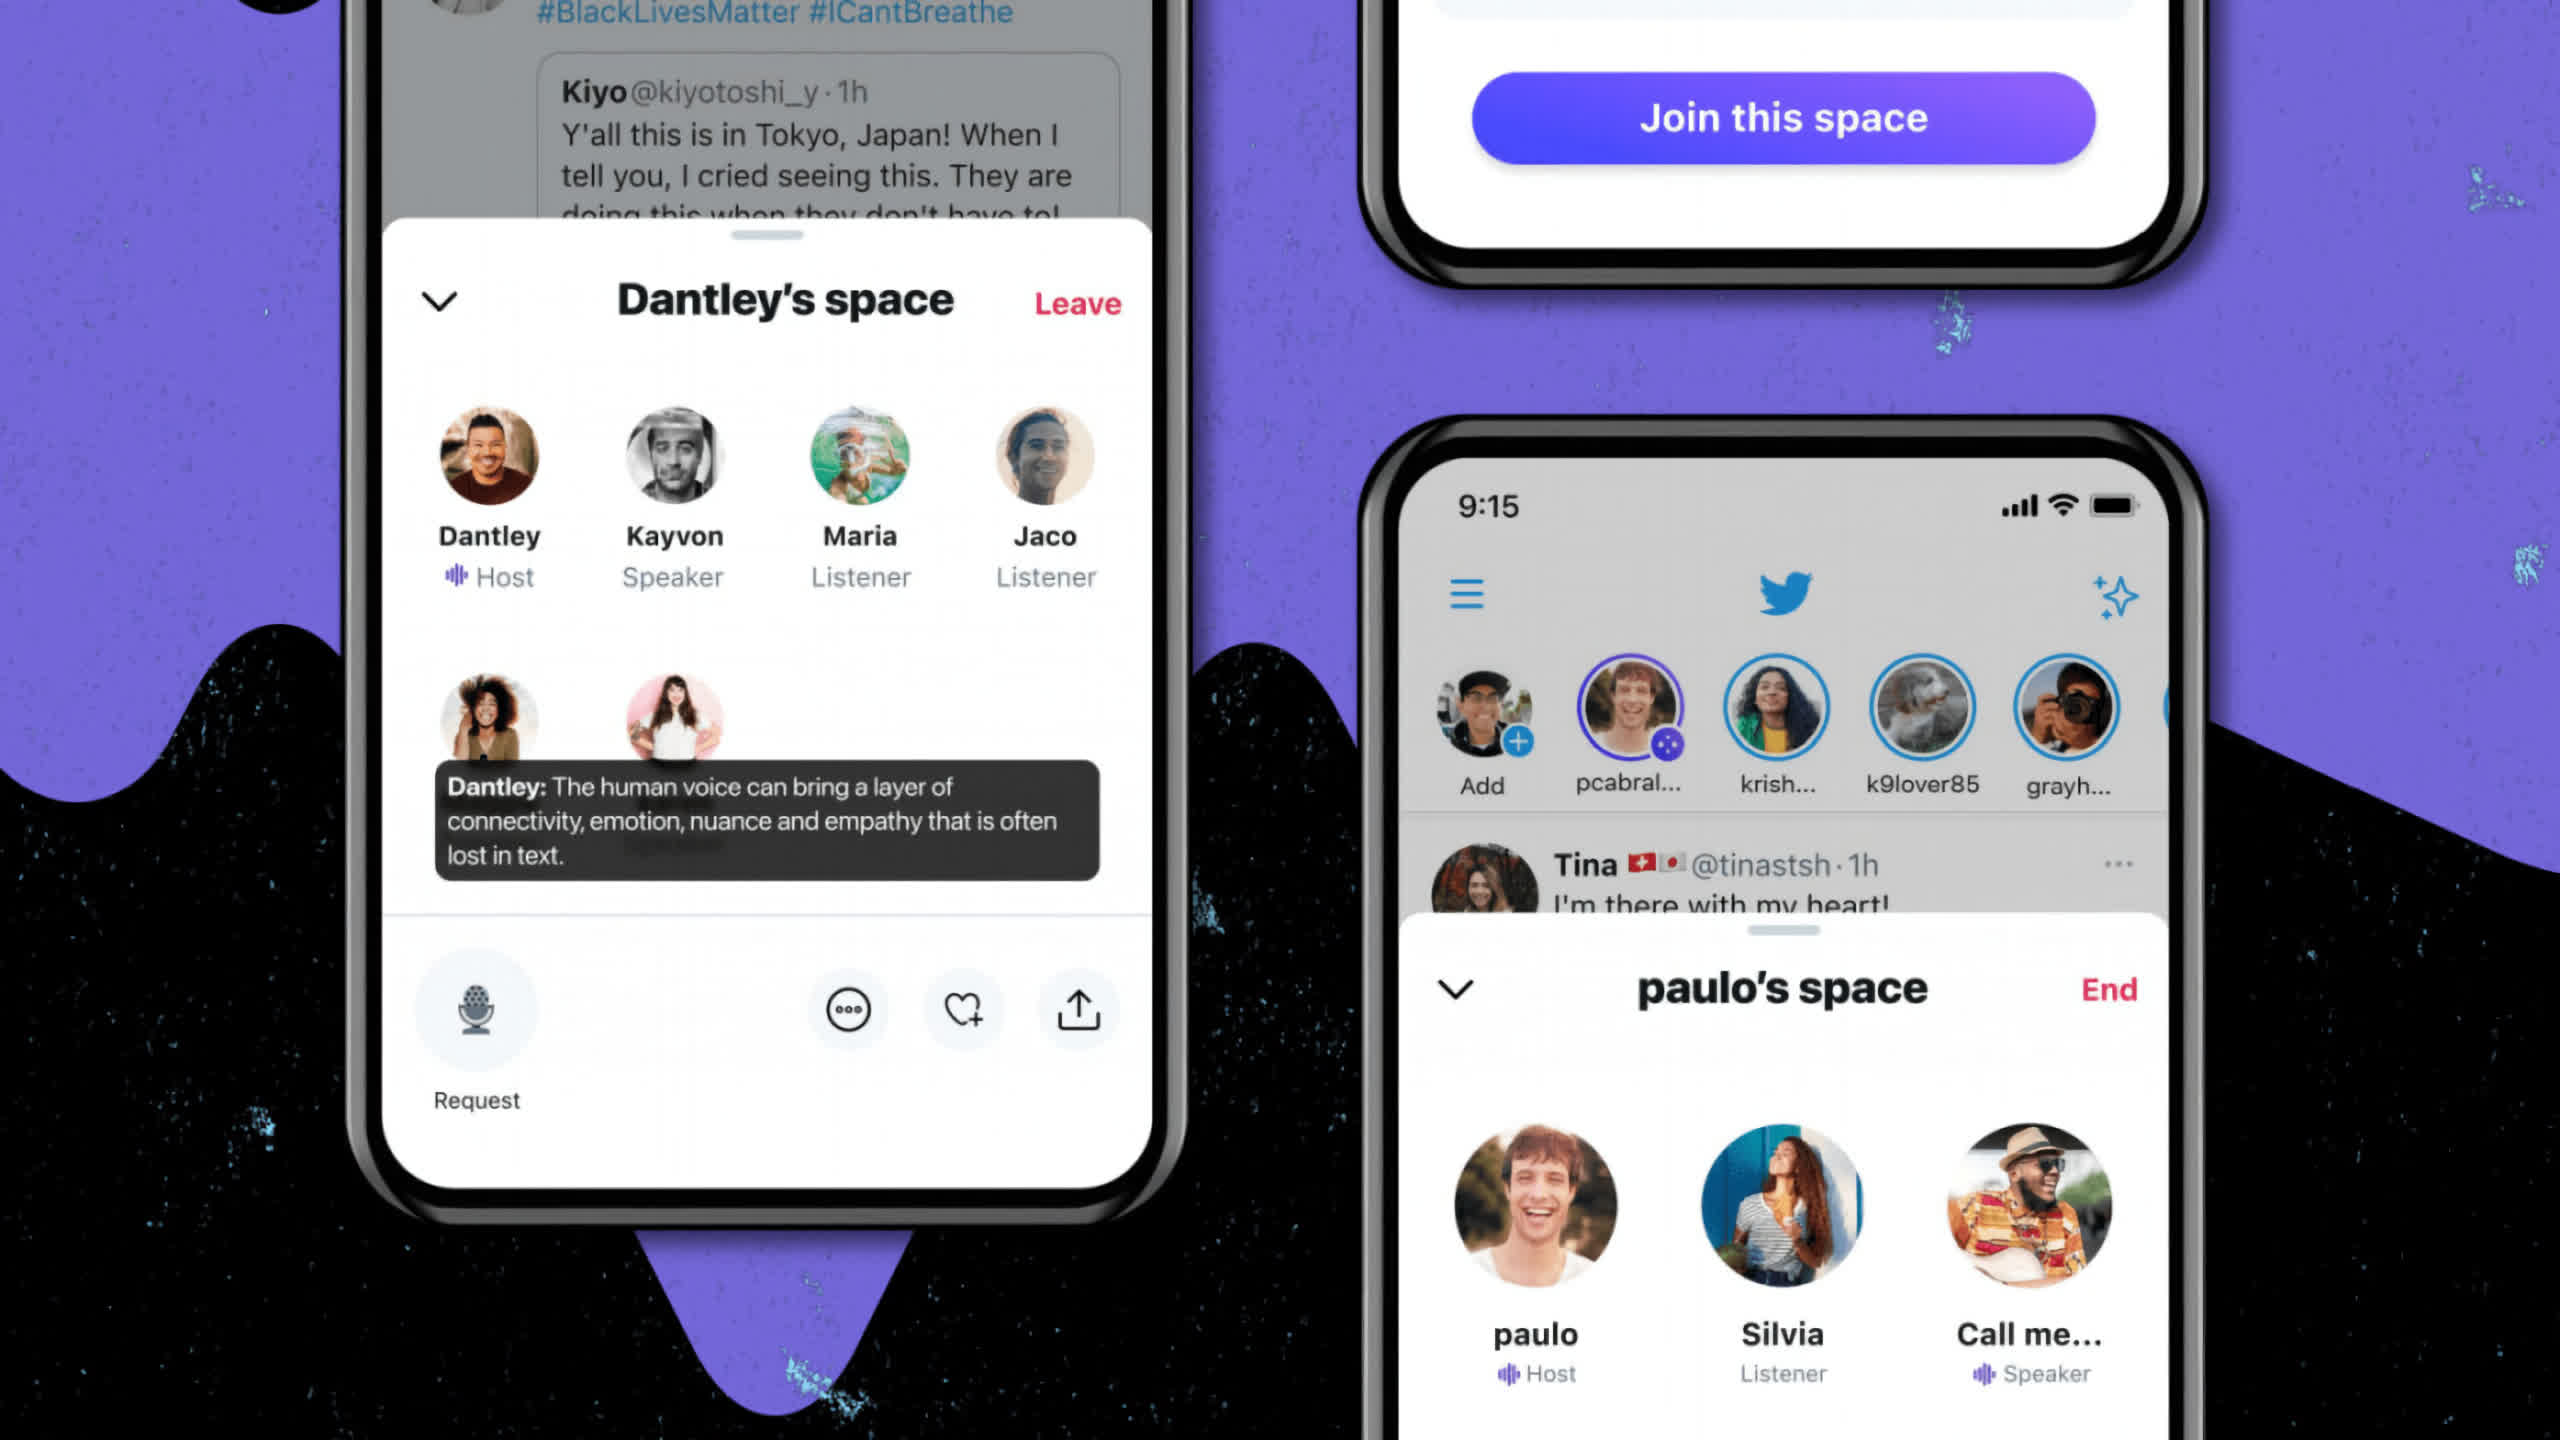 Twitter opens up Spaces to anyone with 600+ followers